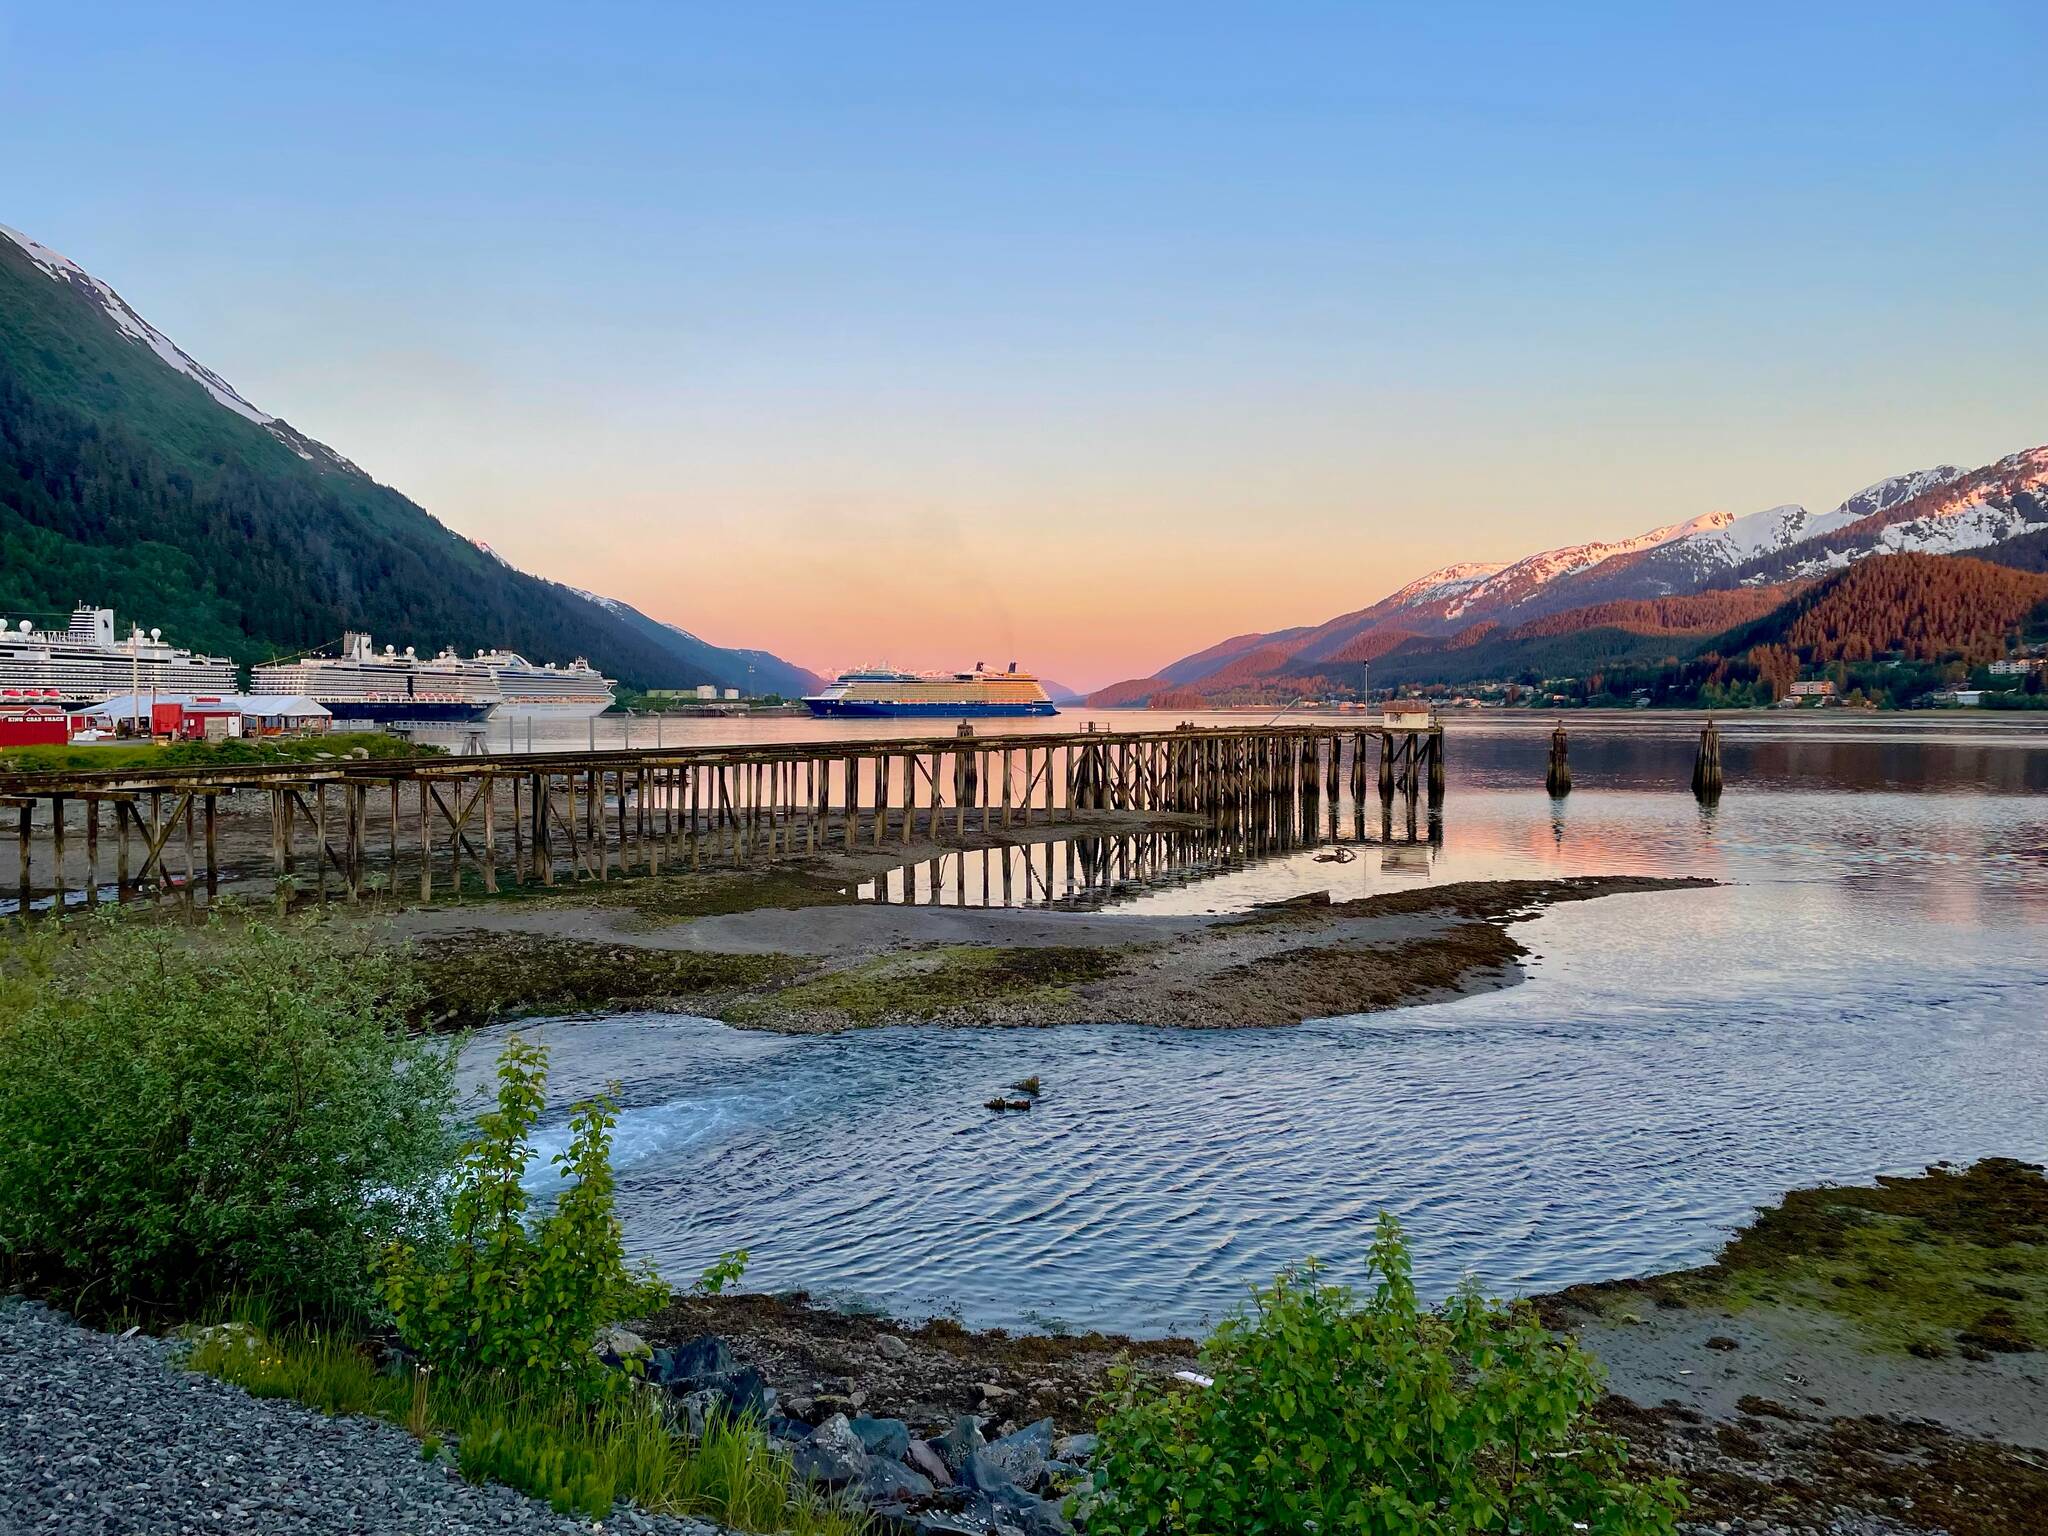 Gastineau Channel on the evening of Memorial Day. (Courtesy Photo / Asia Ver)